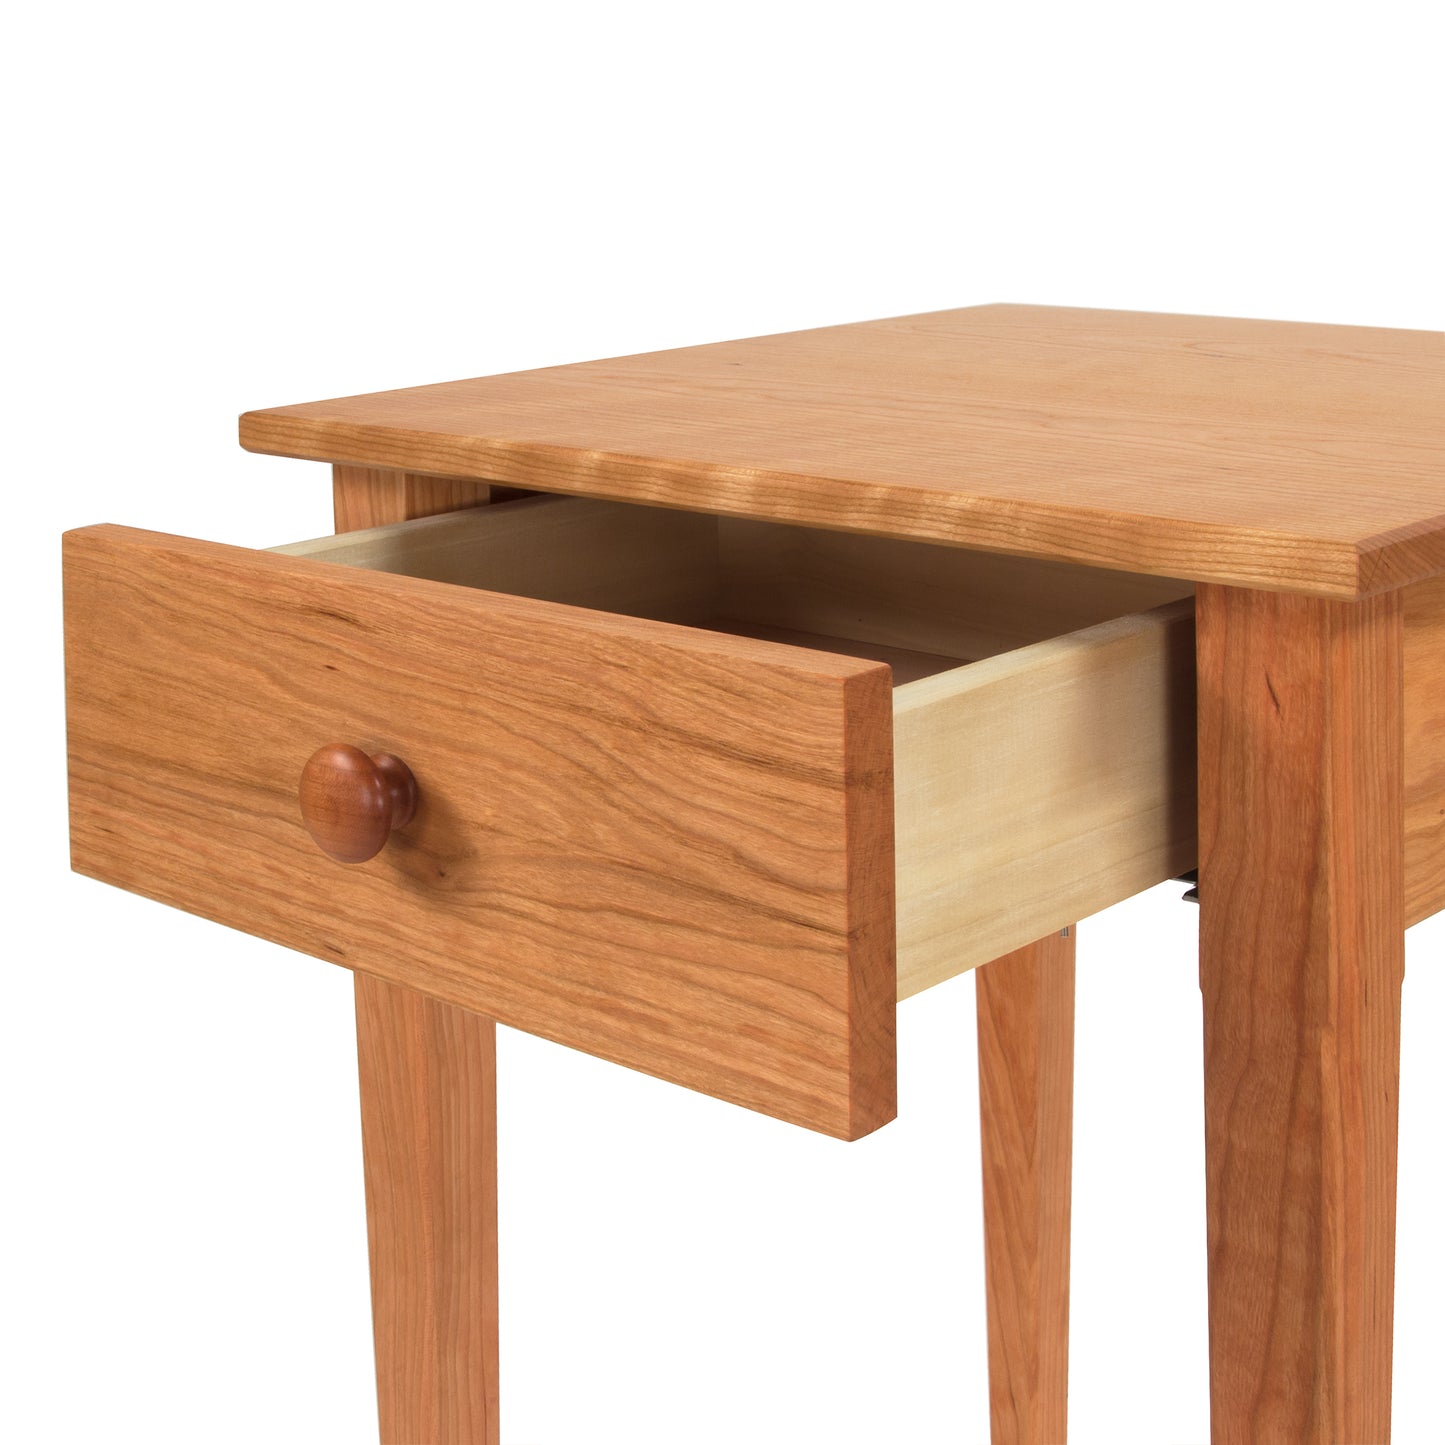 A Vermont Shaker Bedside Table by Maple Corner Woodworks with an open drawer, showcasing its simple design and light wood construction. The knob on the drawer is round, matching the wood’s tone of solid woods.